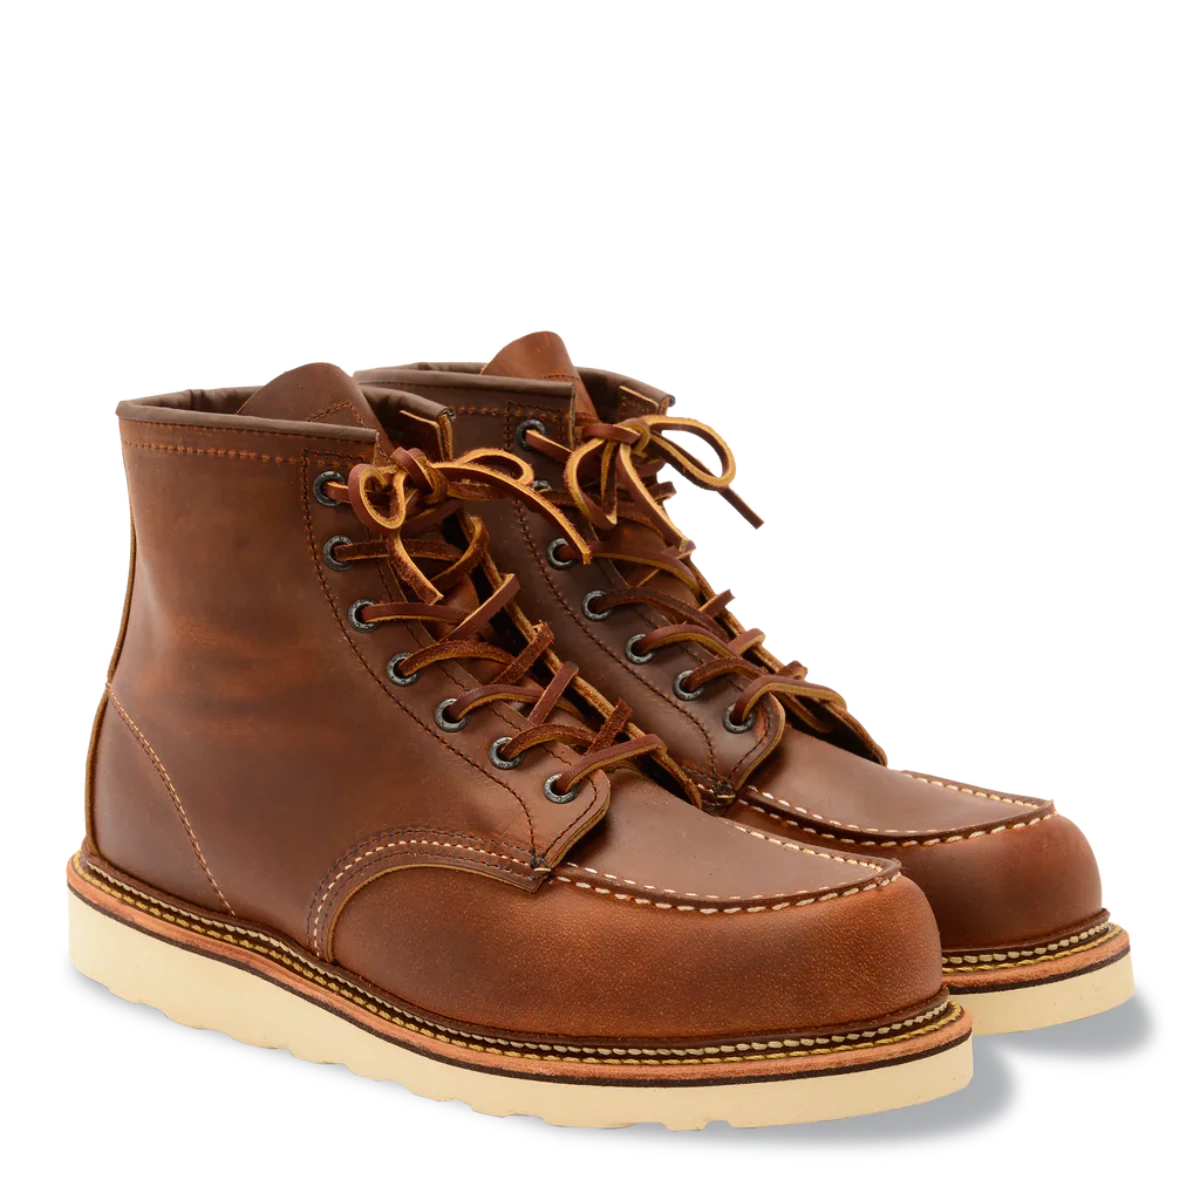 Brown leather Red Wing boots with cream soles, double stitching and leather laces. Seven eyelets.